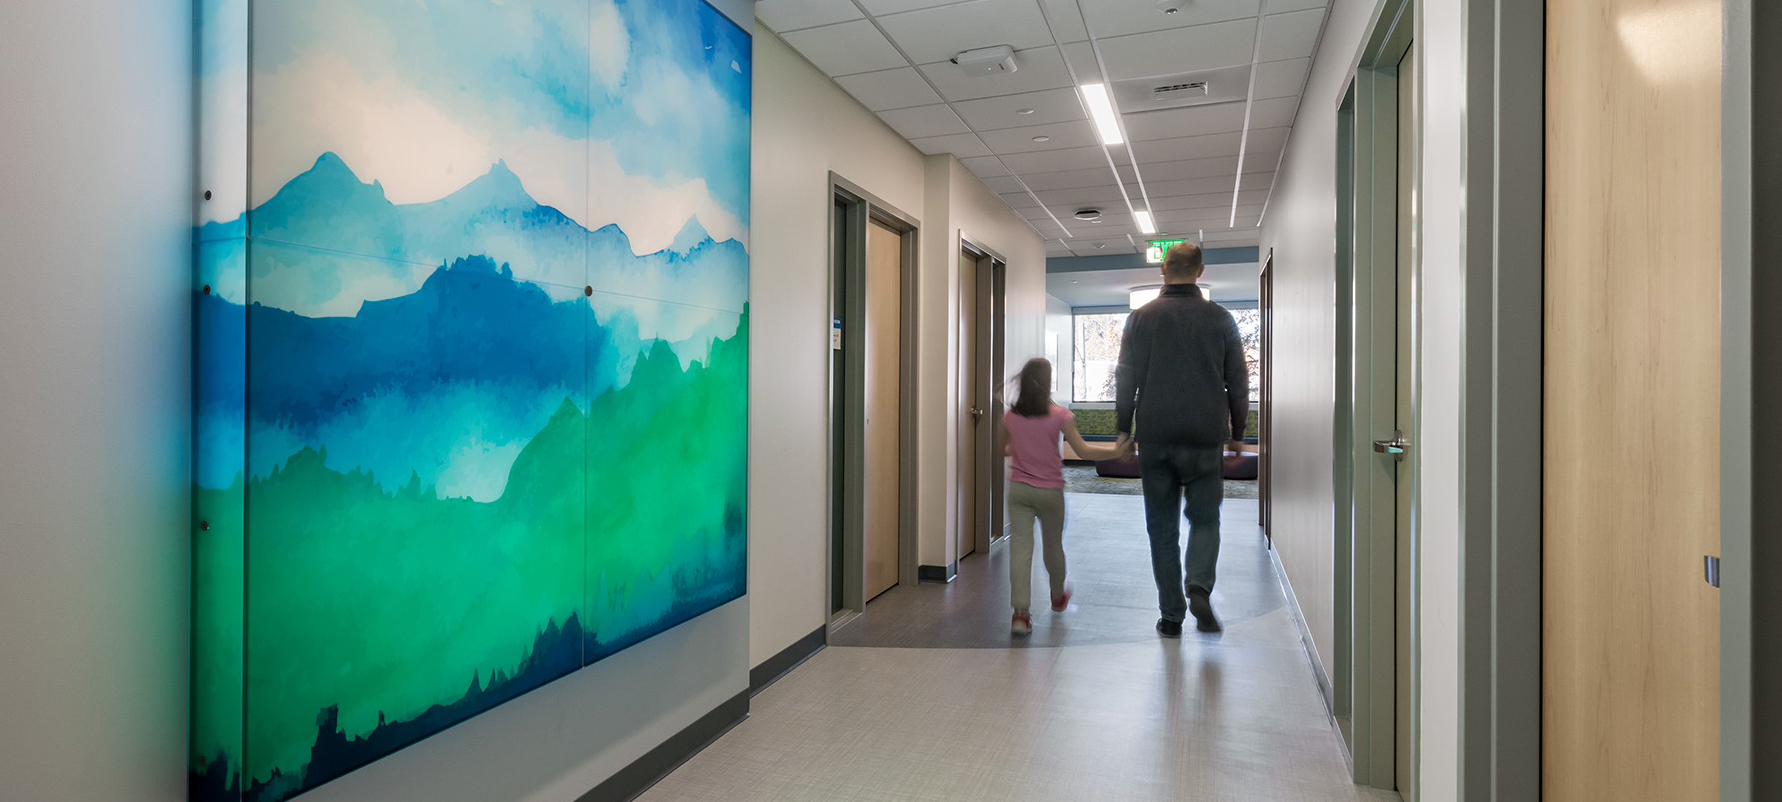 Svigals + Partners Bring Art, Light and Nature into New Home for Acclaimed Yale Child Study Center